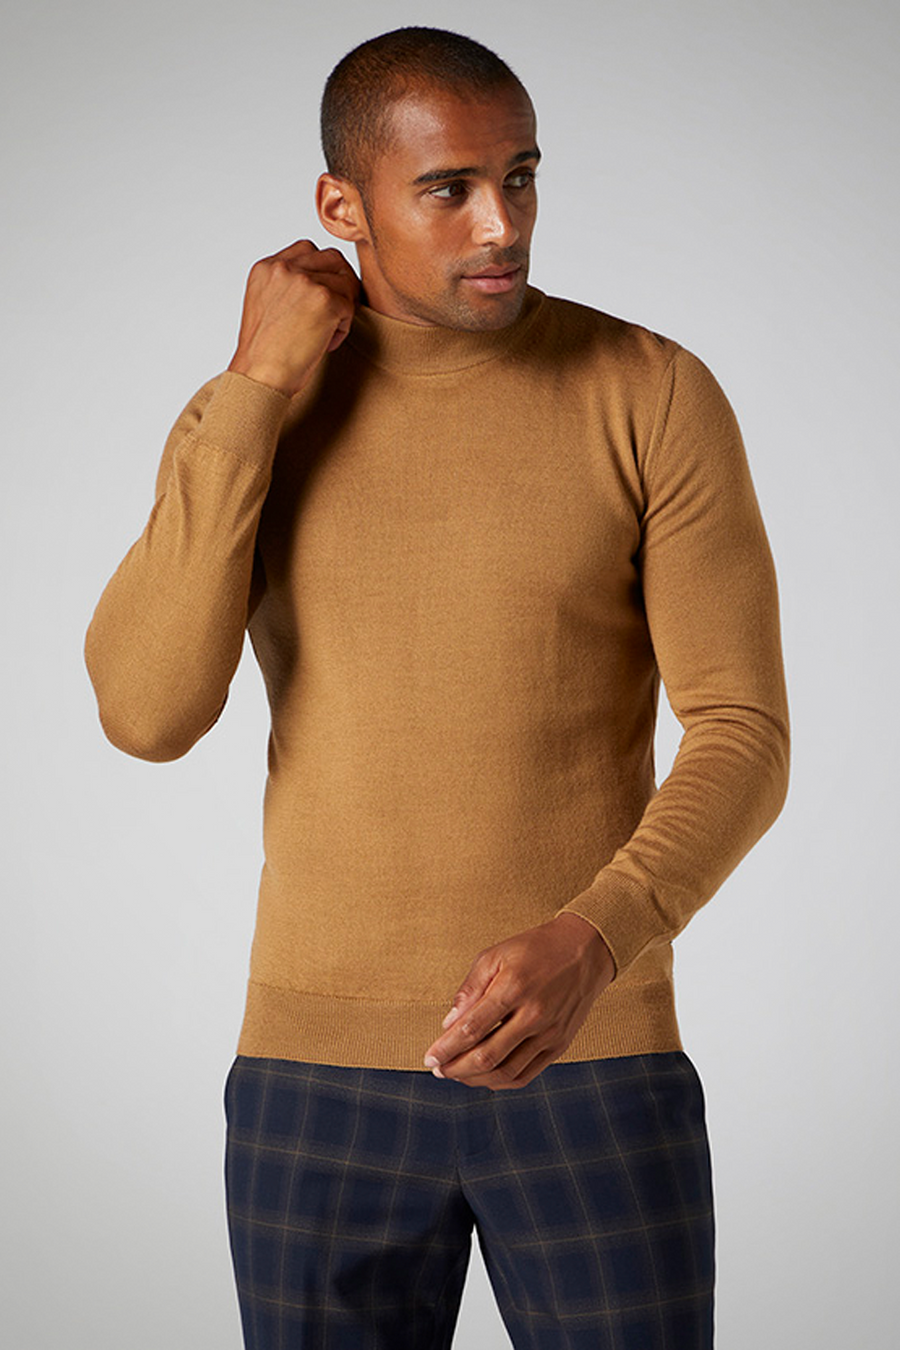 Buy the Remus Uomo L/S Turtle Neck Knitwear Caramel at Intro. Spend £50 for free UK delivery. Official stockists. We ship worldwide.